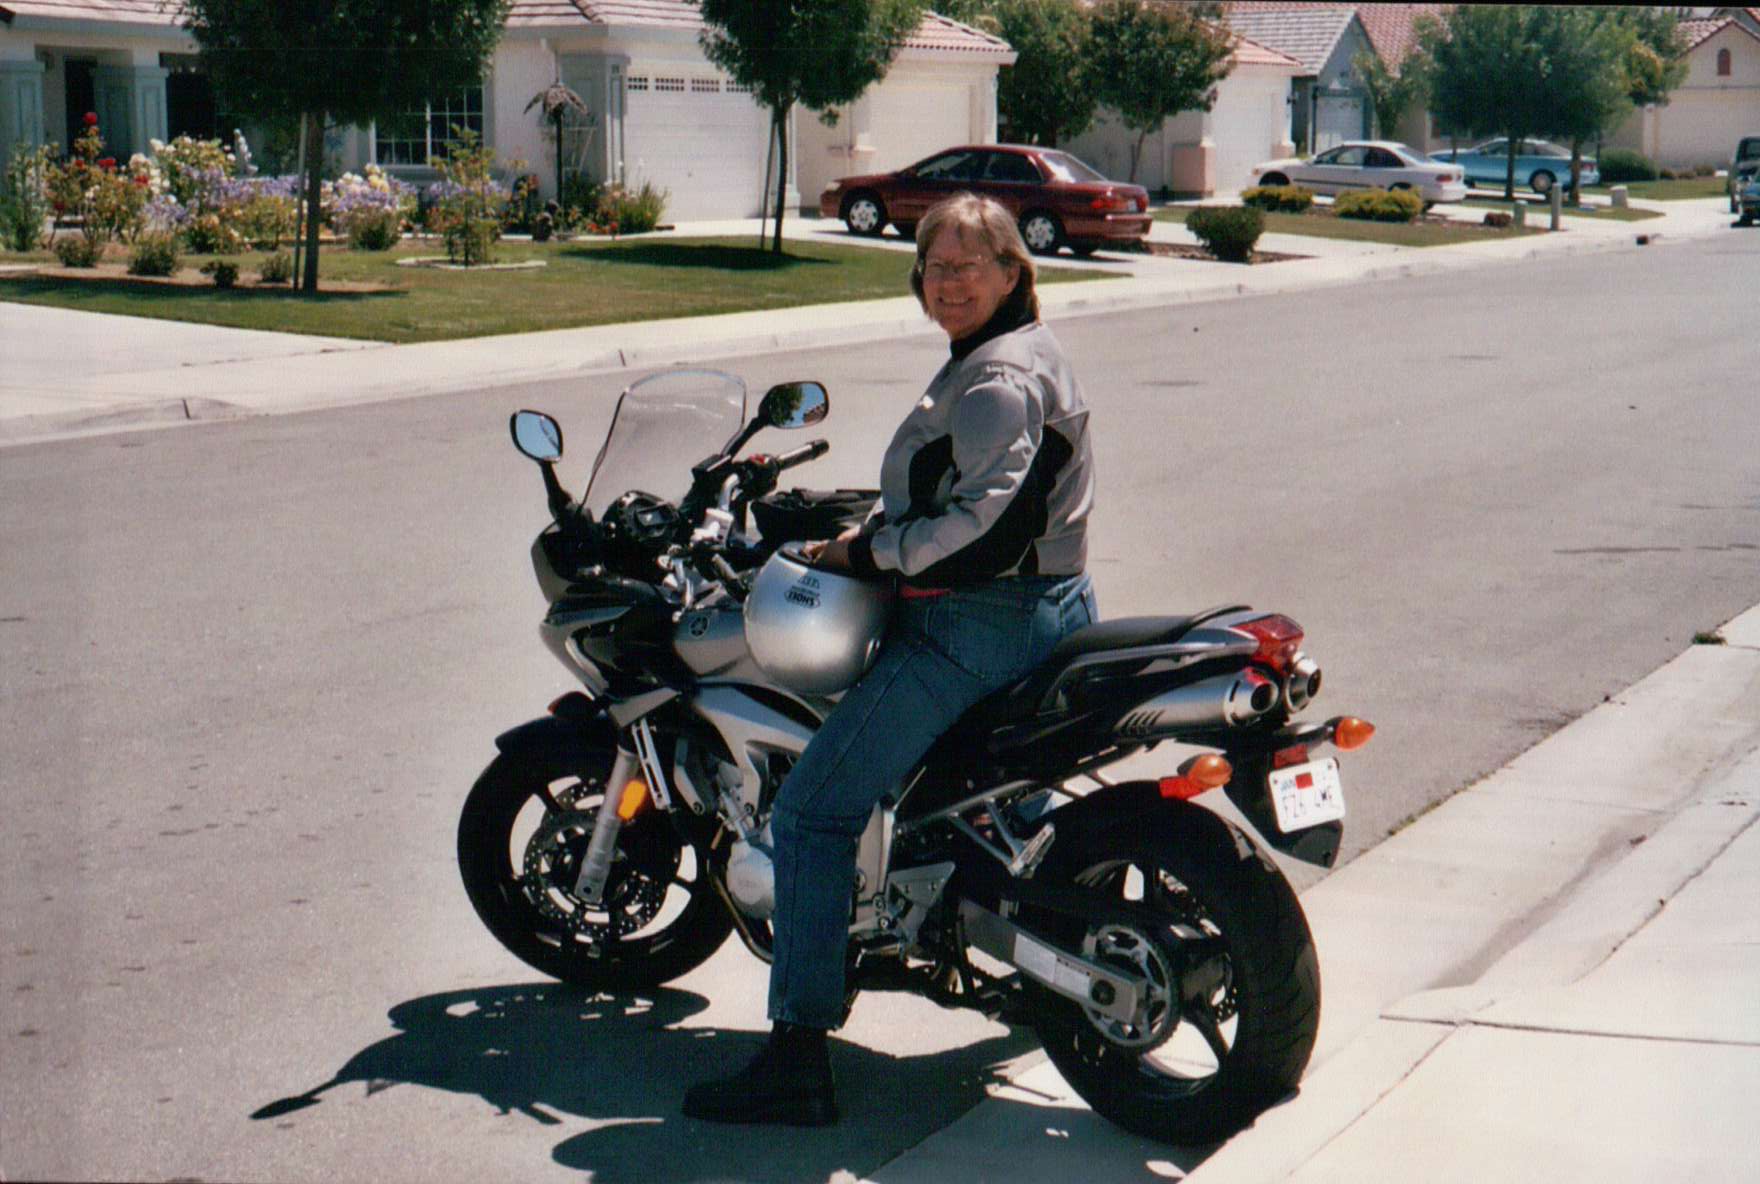 Profile of a female motorcyclist meet Susan on her FZ6